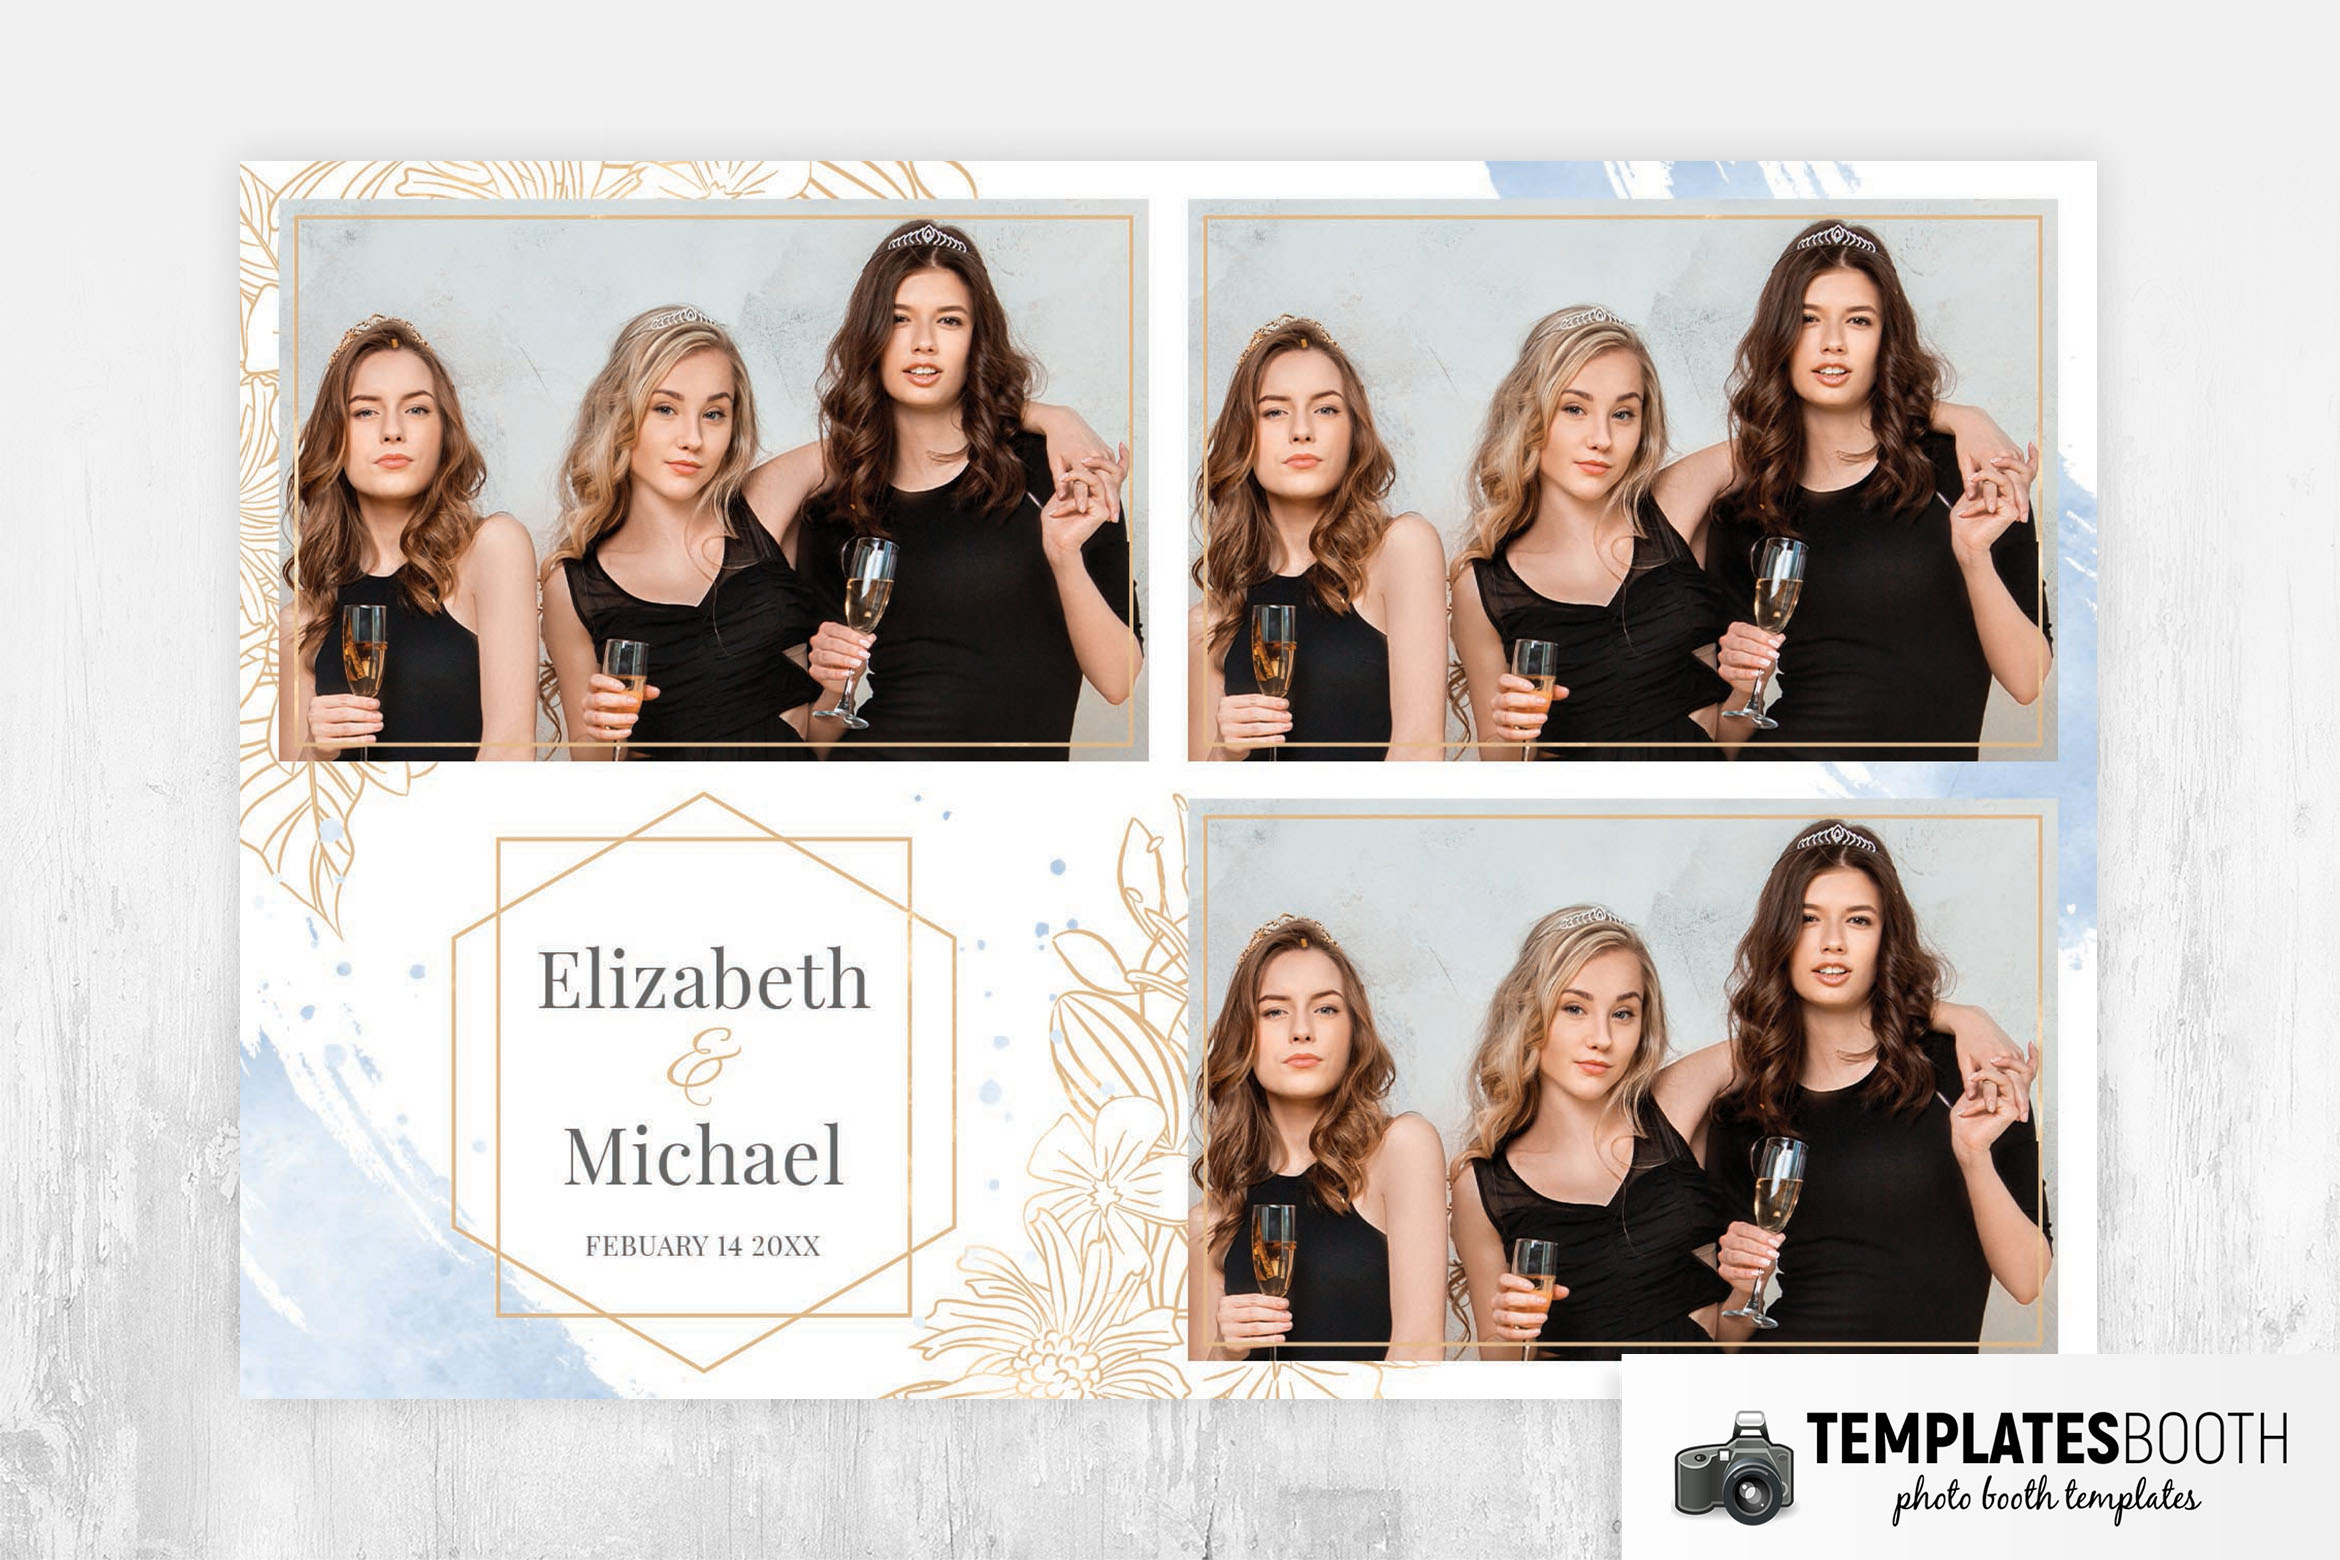 Simple Wedding Photo Booth Template